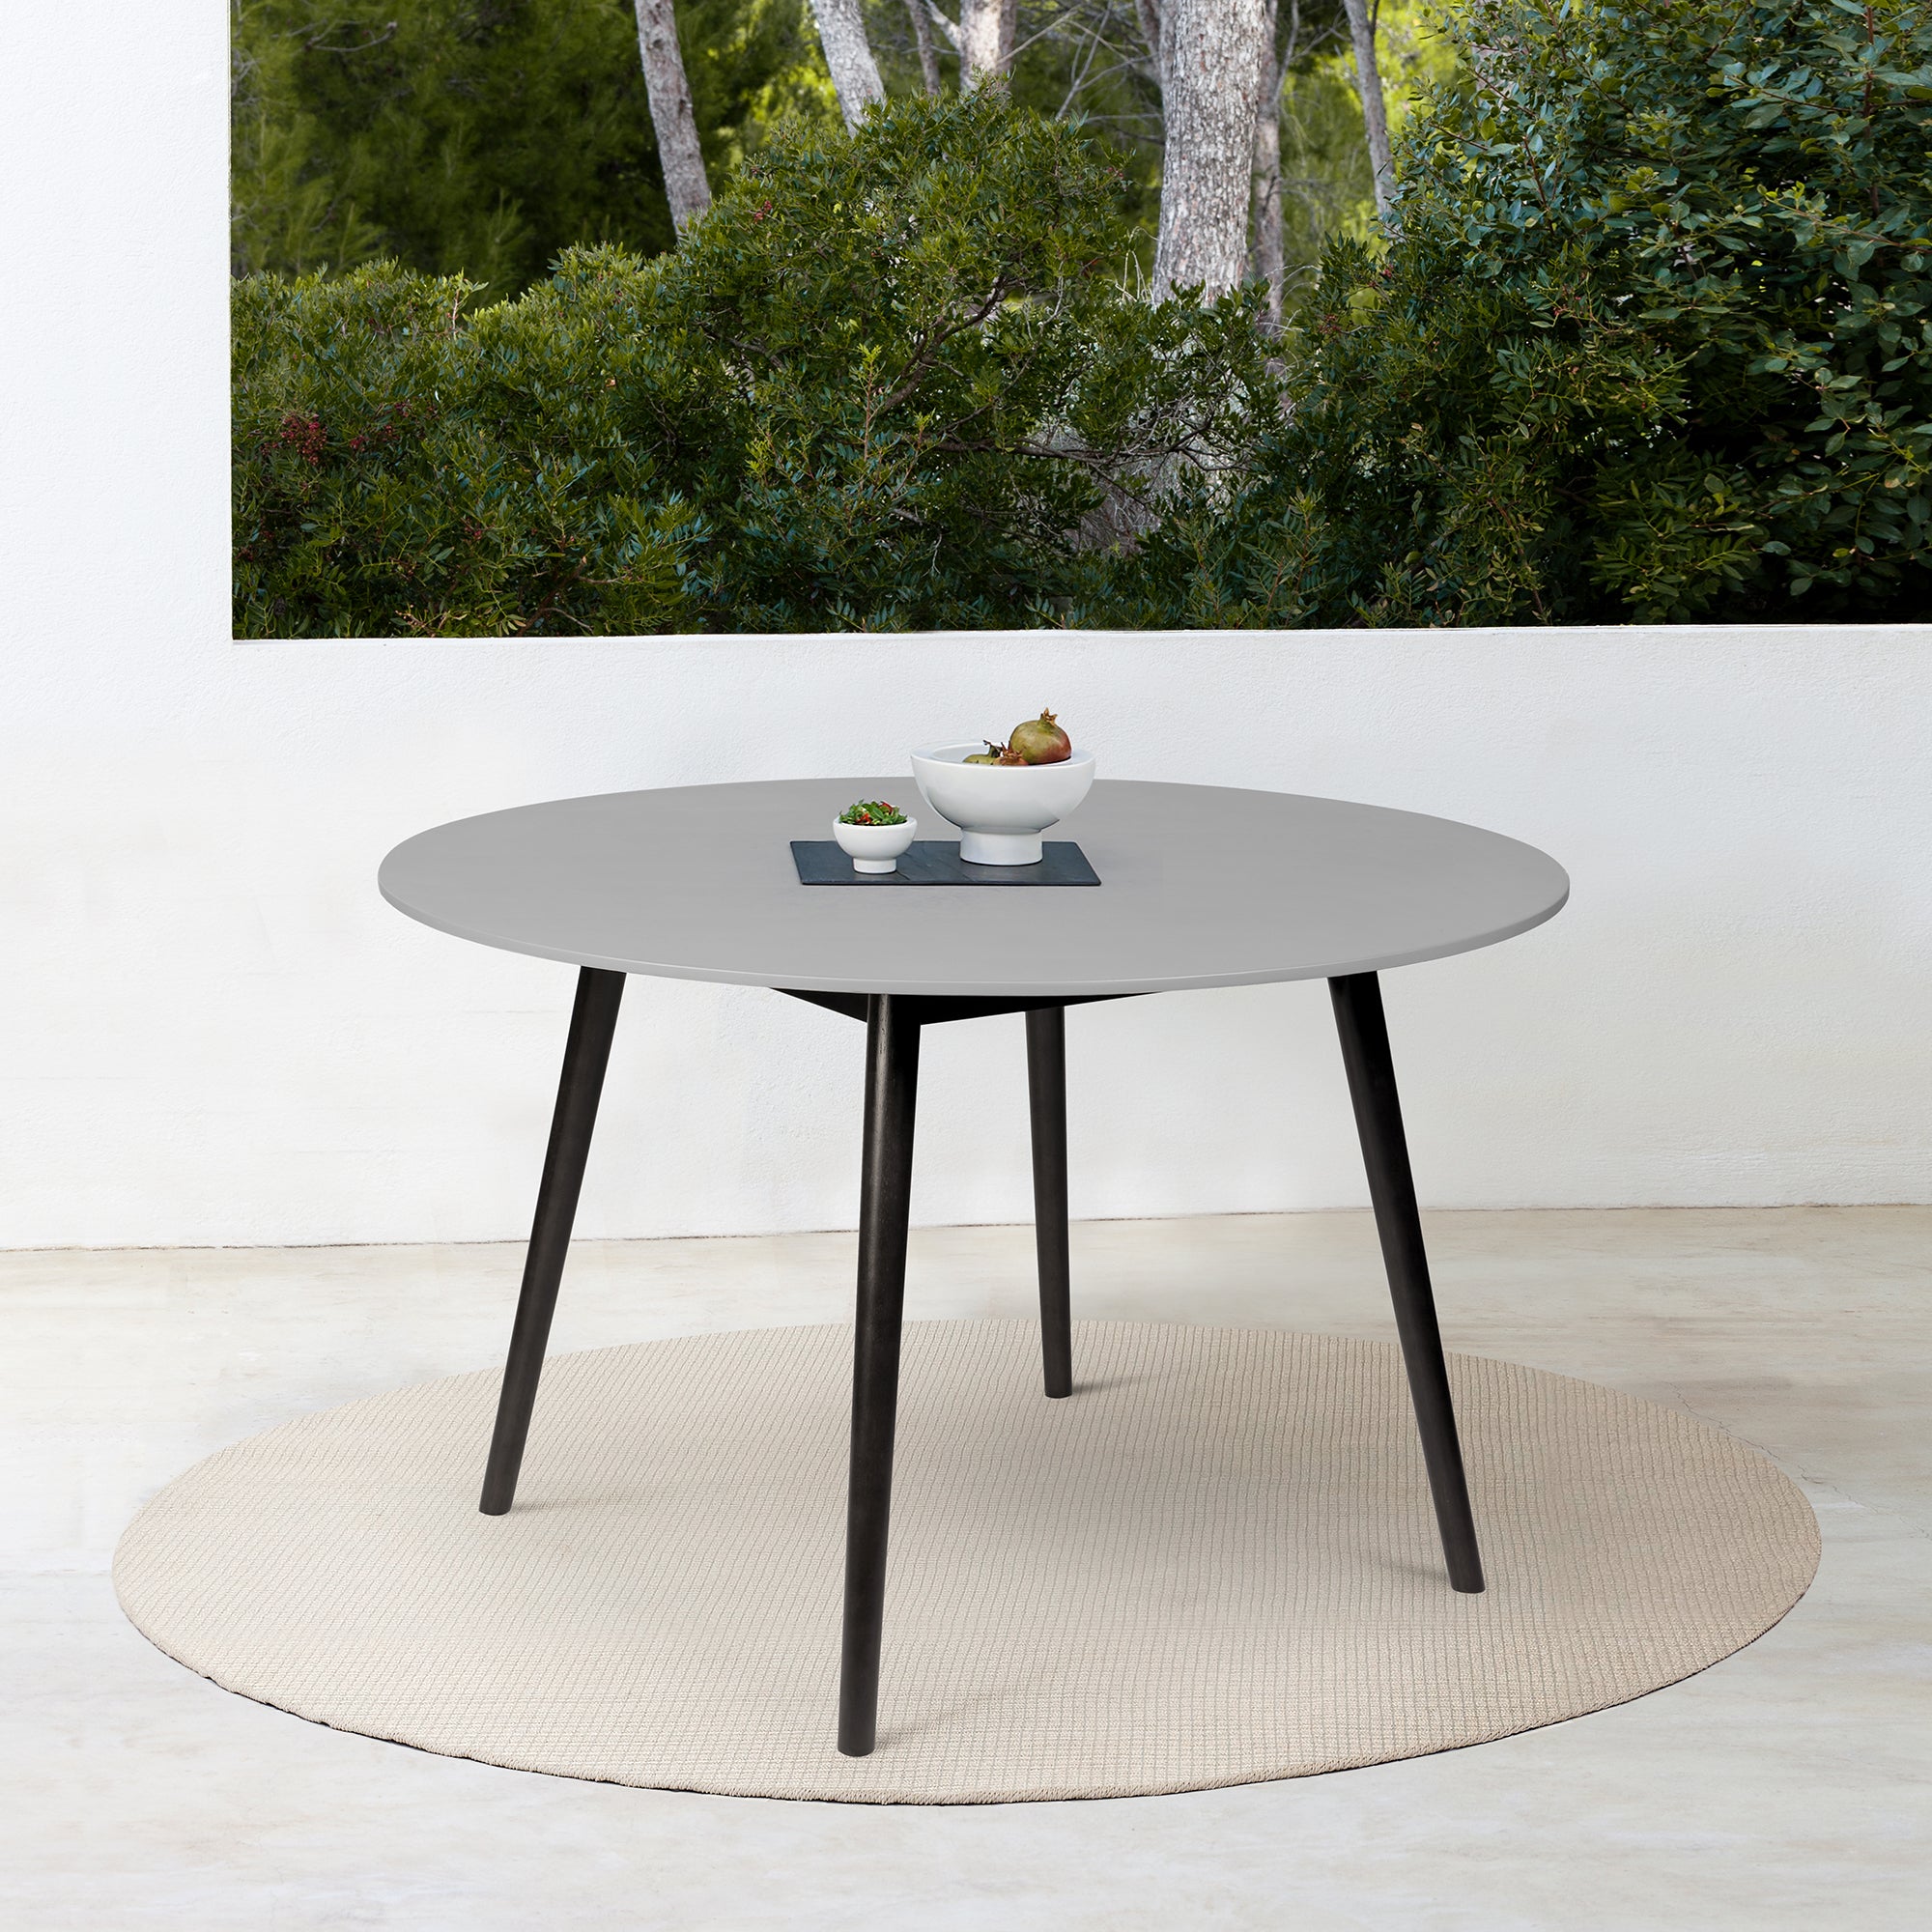 Armen Living - Sydney Outdoor Patio Round Dining Table in Eucalyptus and Grey Stone - 840254335974